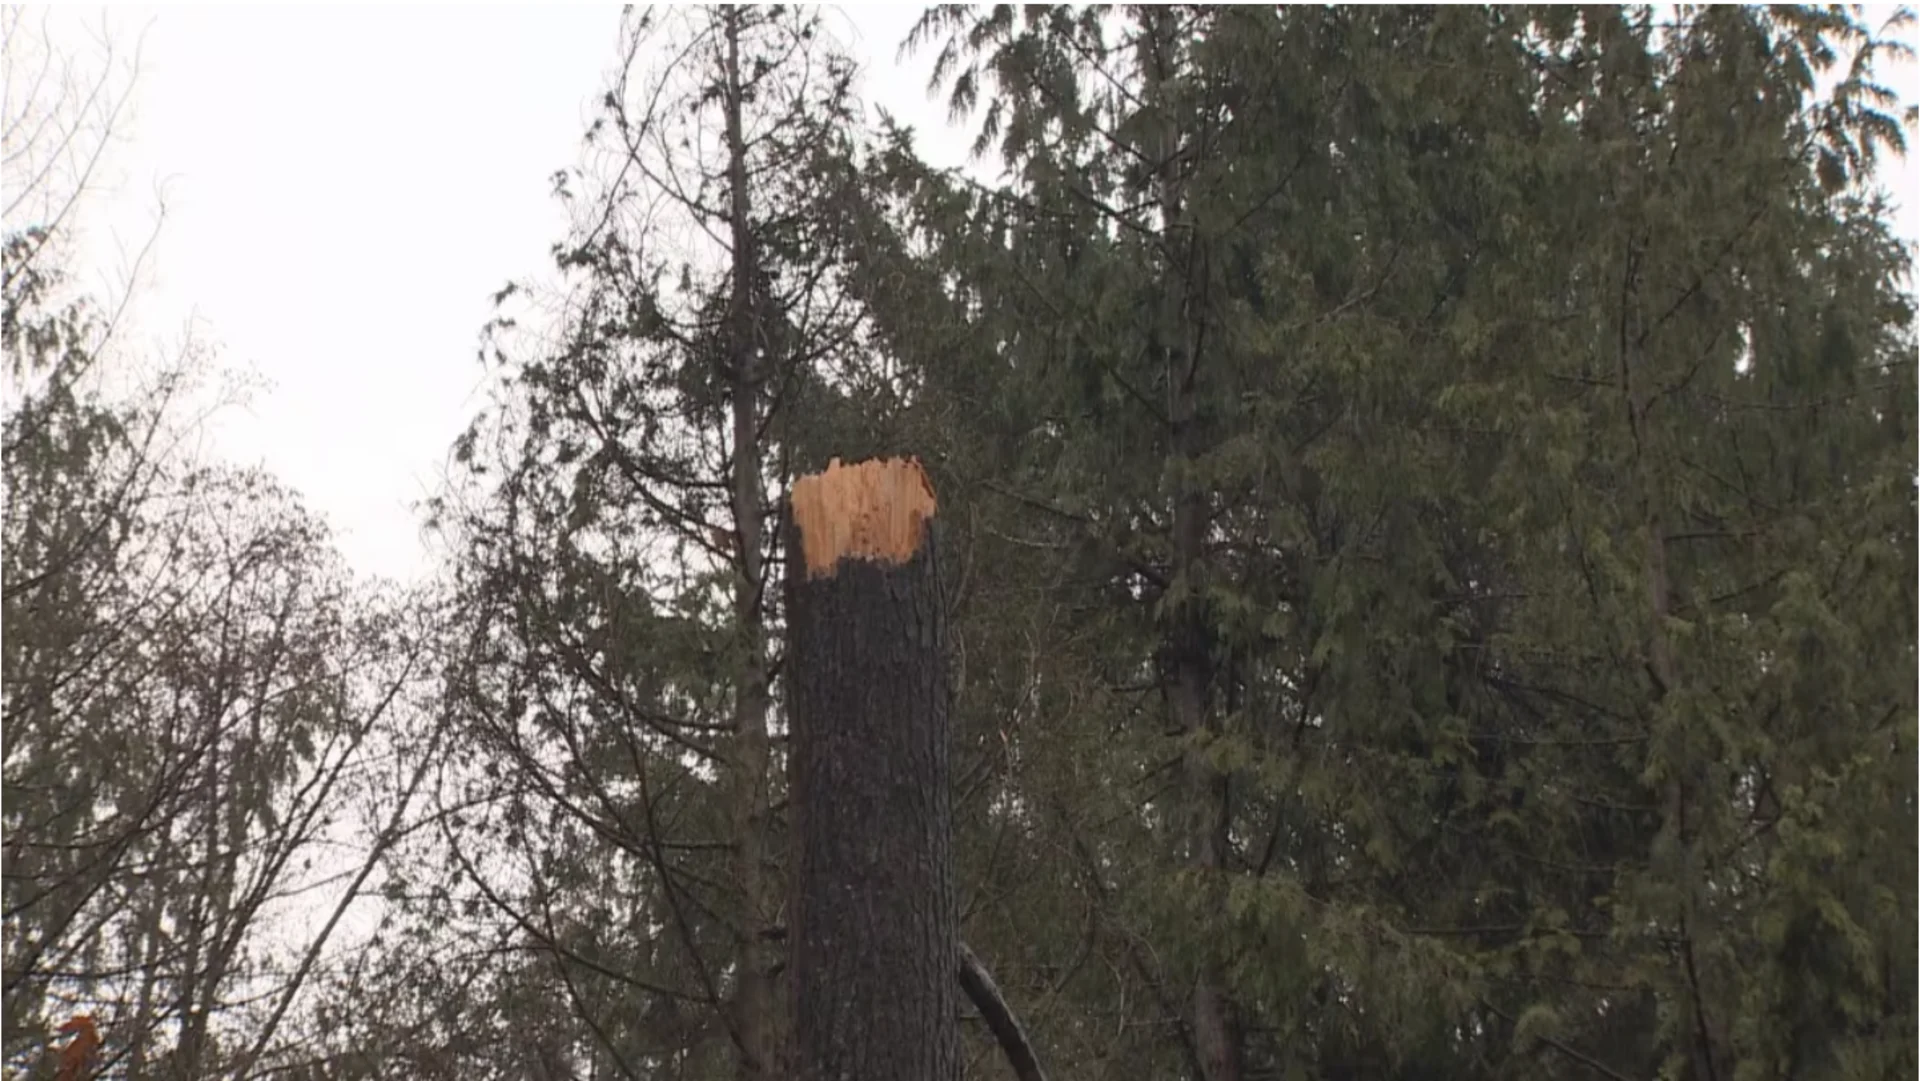 CBC: About 160,000 trees, including this one pictured on Dec. 1, 2023, are slated for removal. The vast majority, around 140,000, are younger trees less than 20 cm in diameter, according to the Vancouver Park Board. (CBC News)